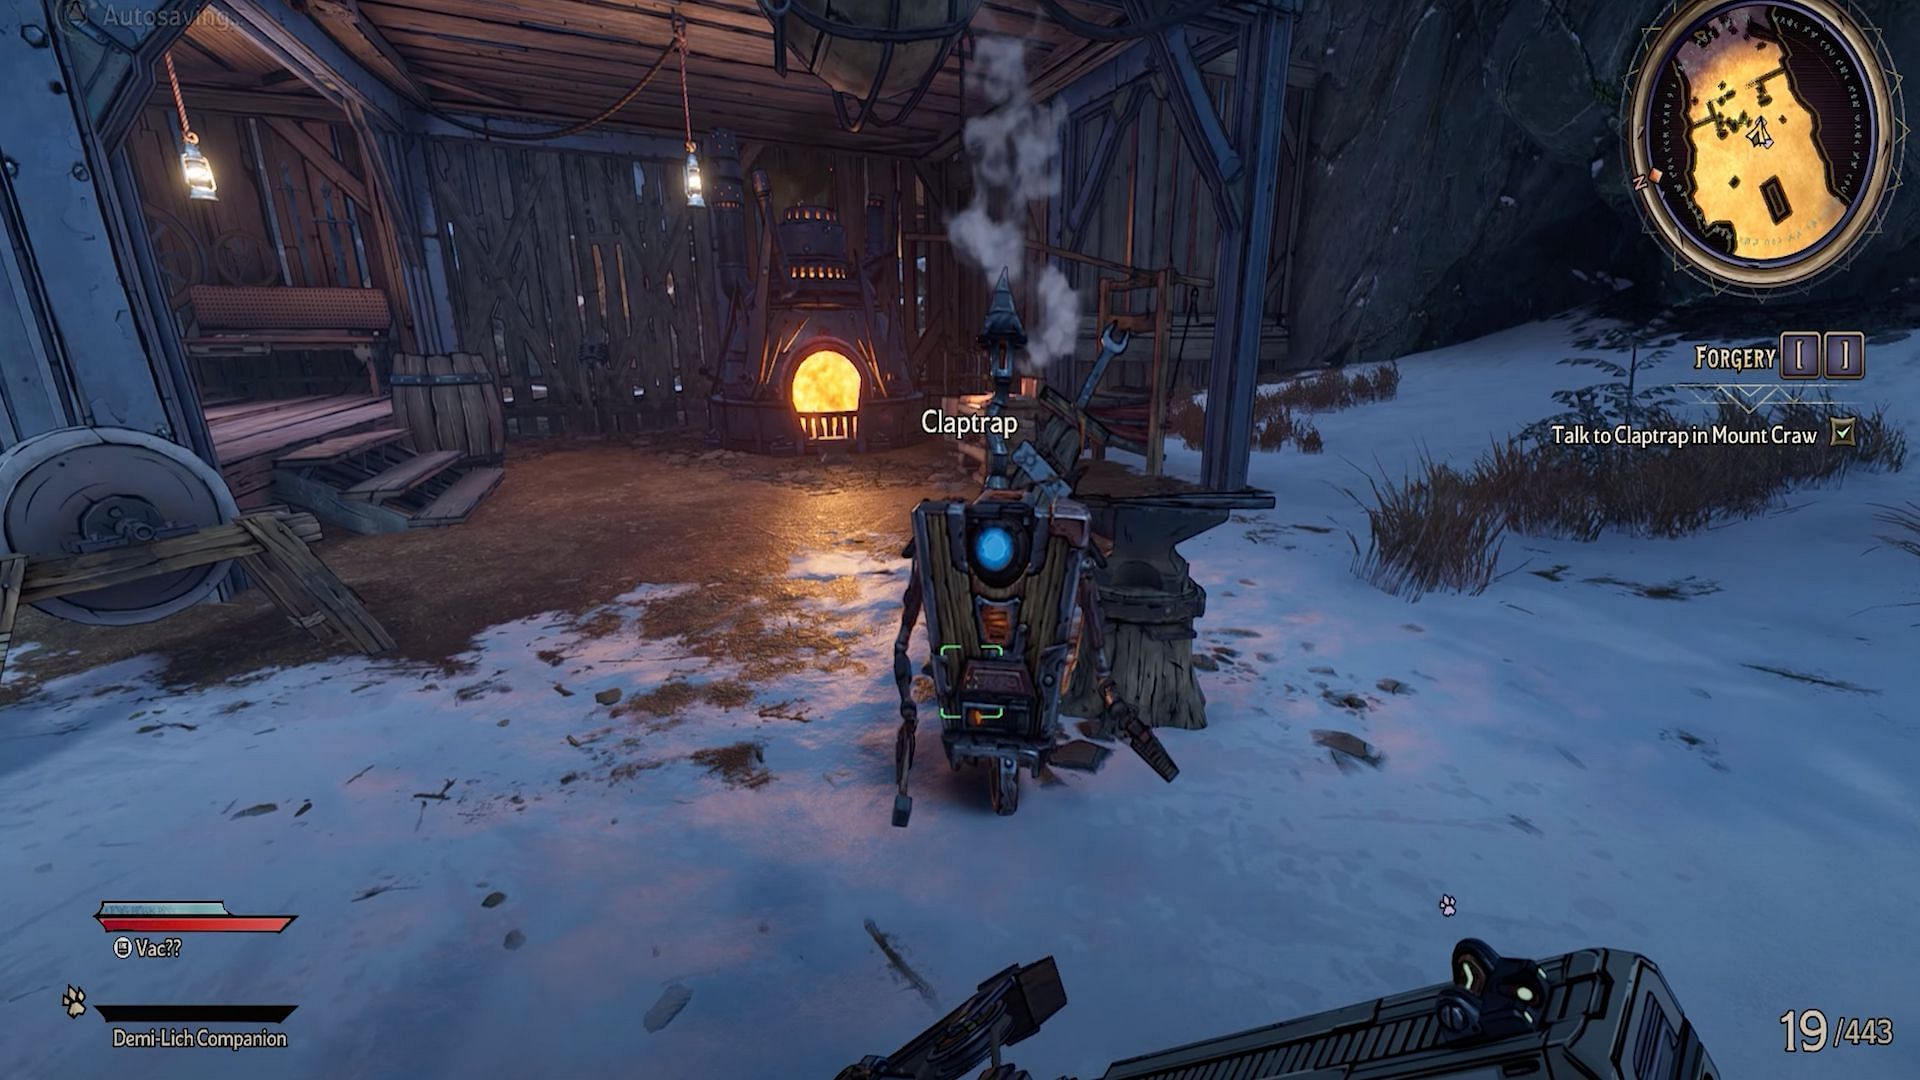 Players can find Claptrap located inside of Mount Craw (Image via Syrekx/YouTube)